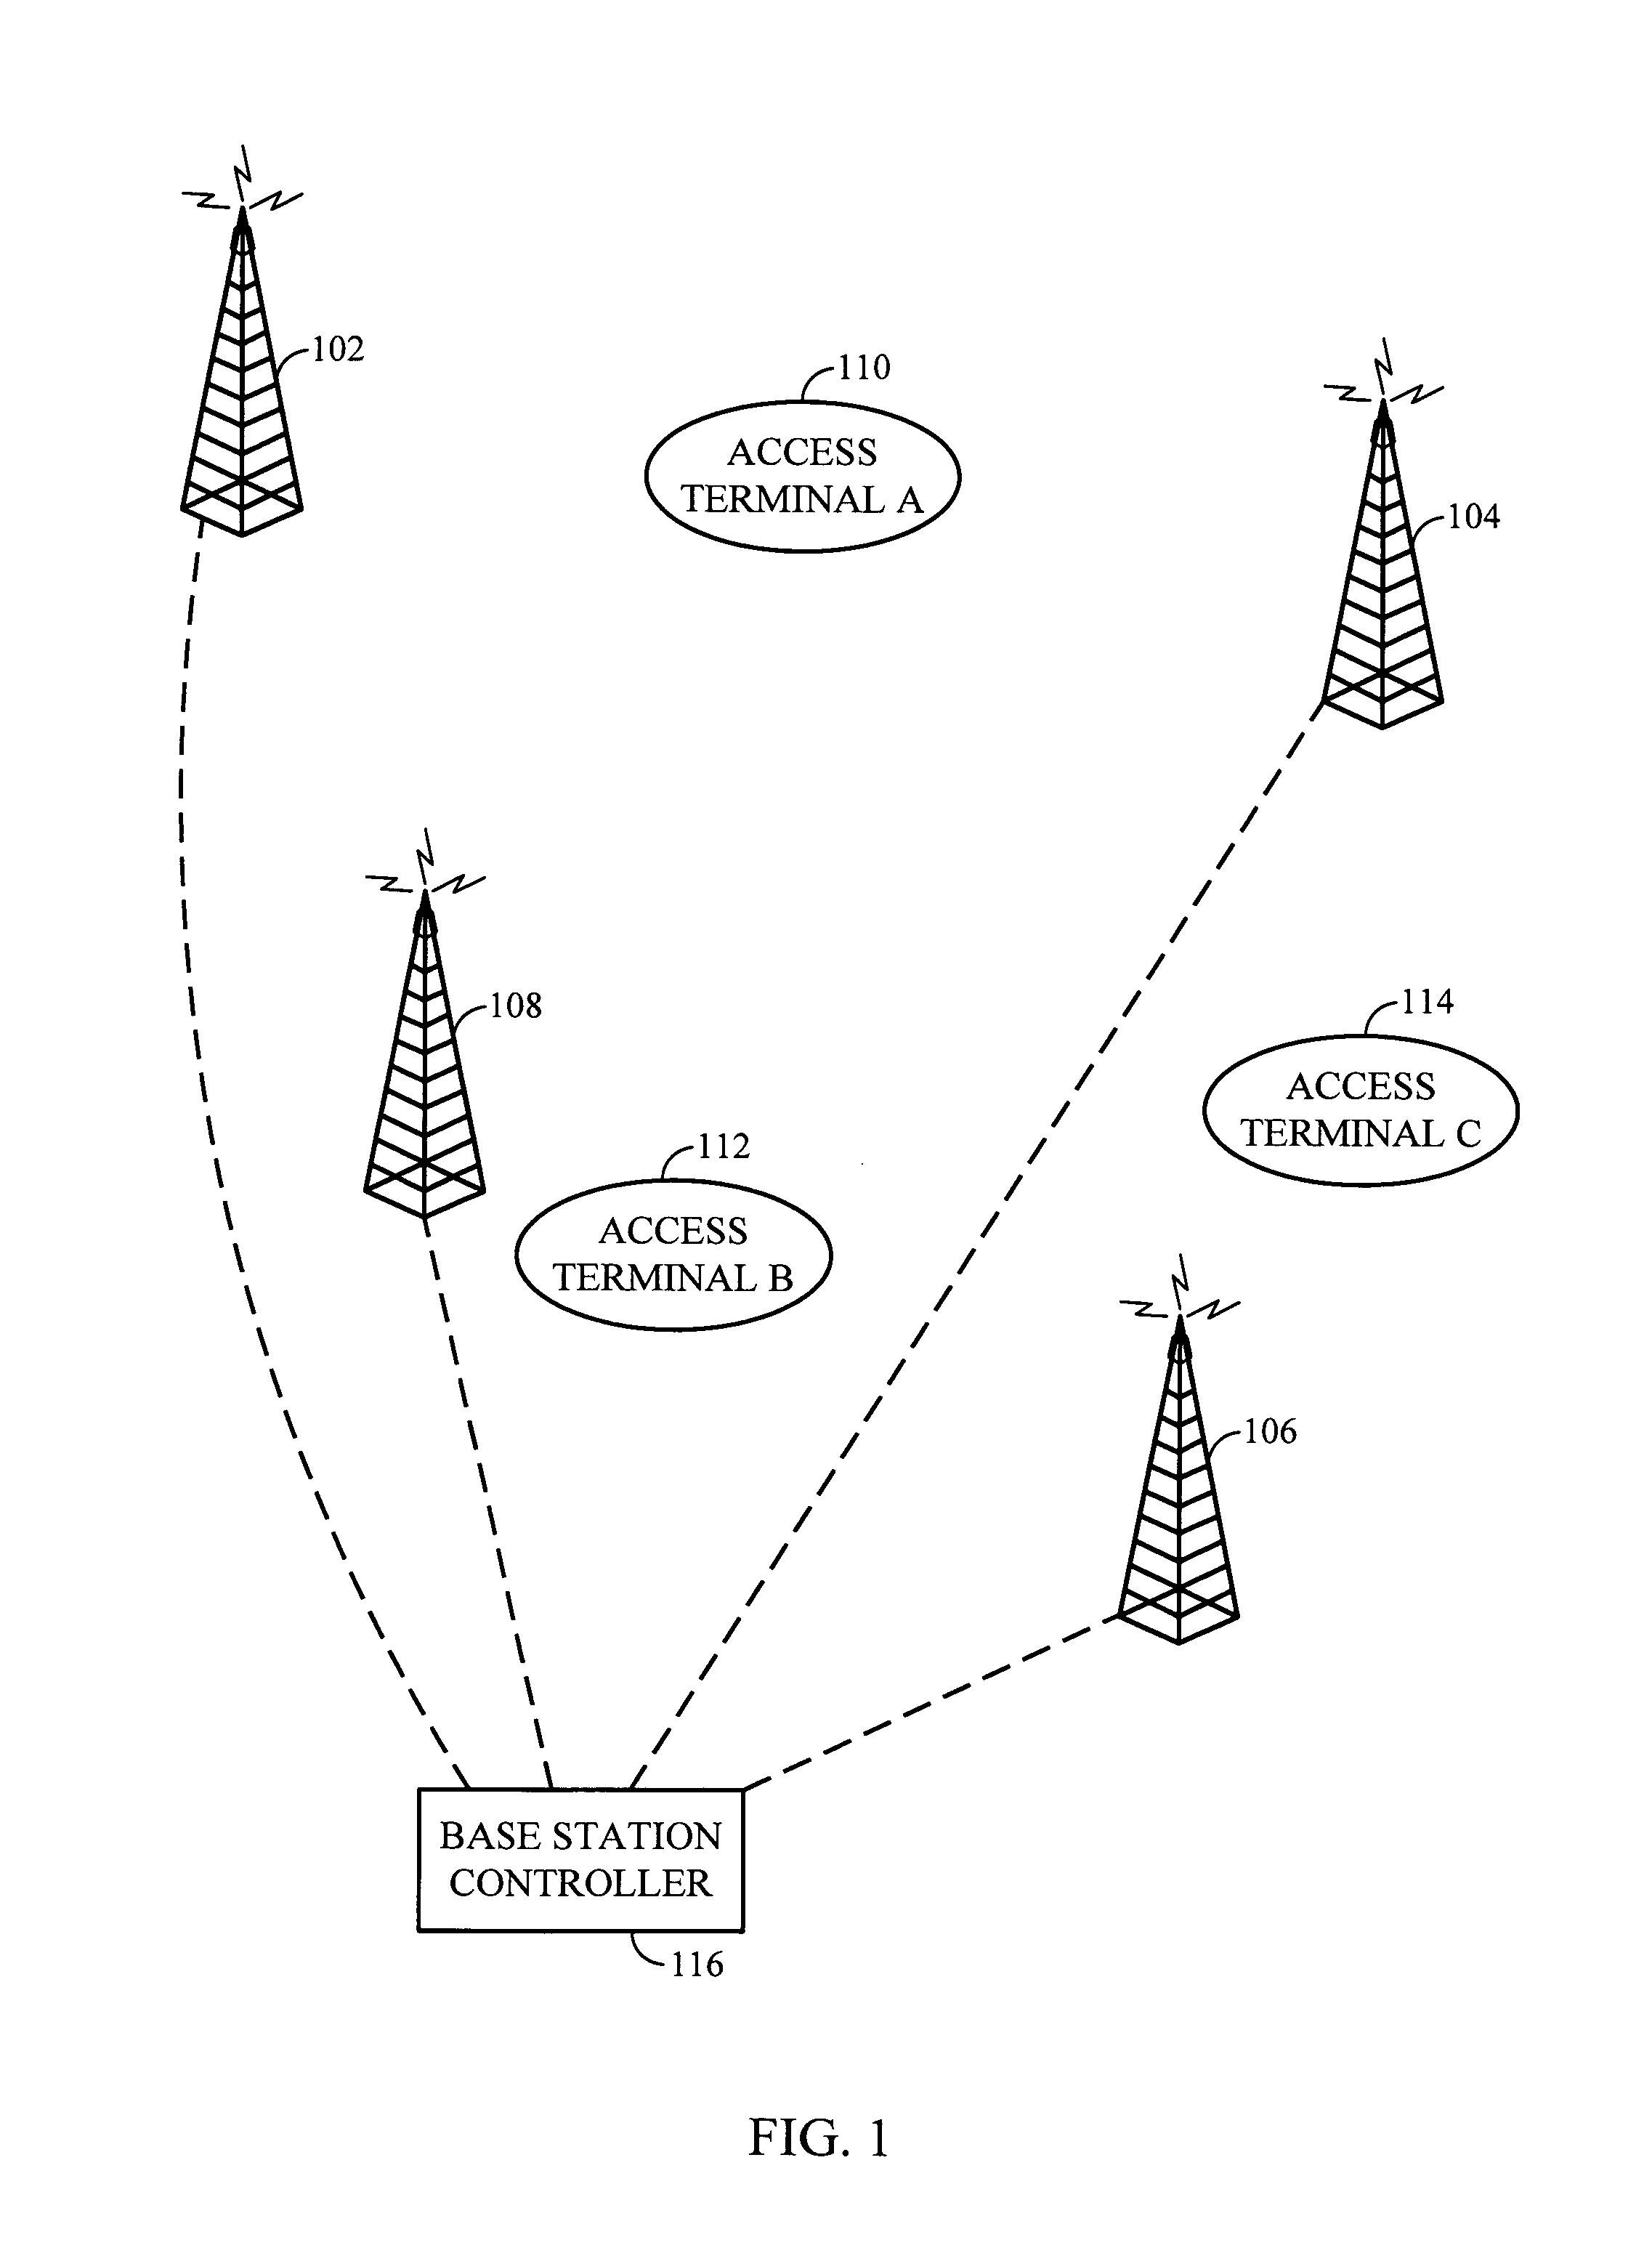 Method of transmitting pilot tones in a multi-sector cell, including null pilot tones, for generating channel quality indicators